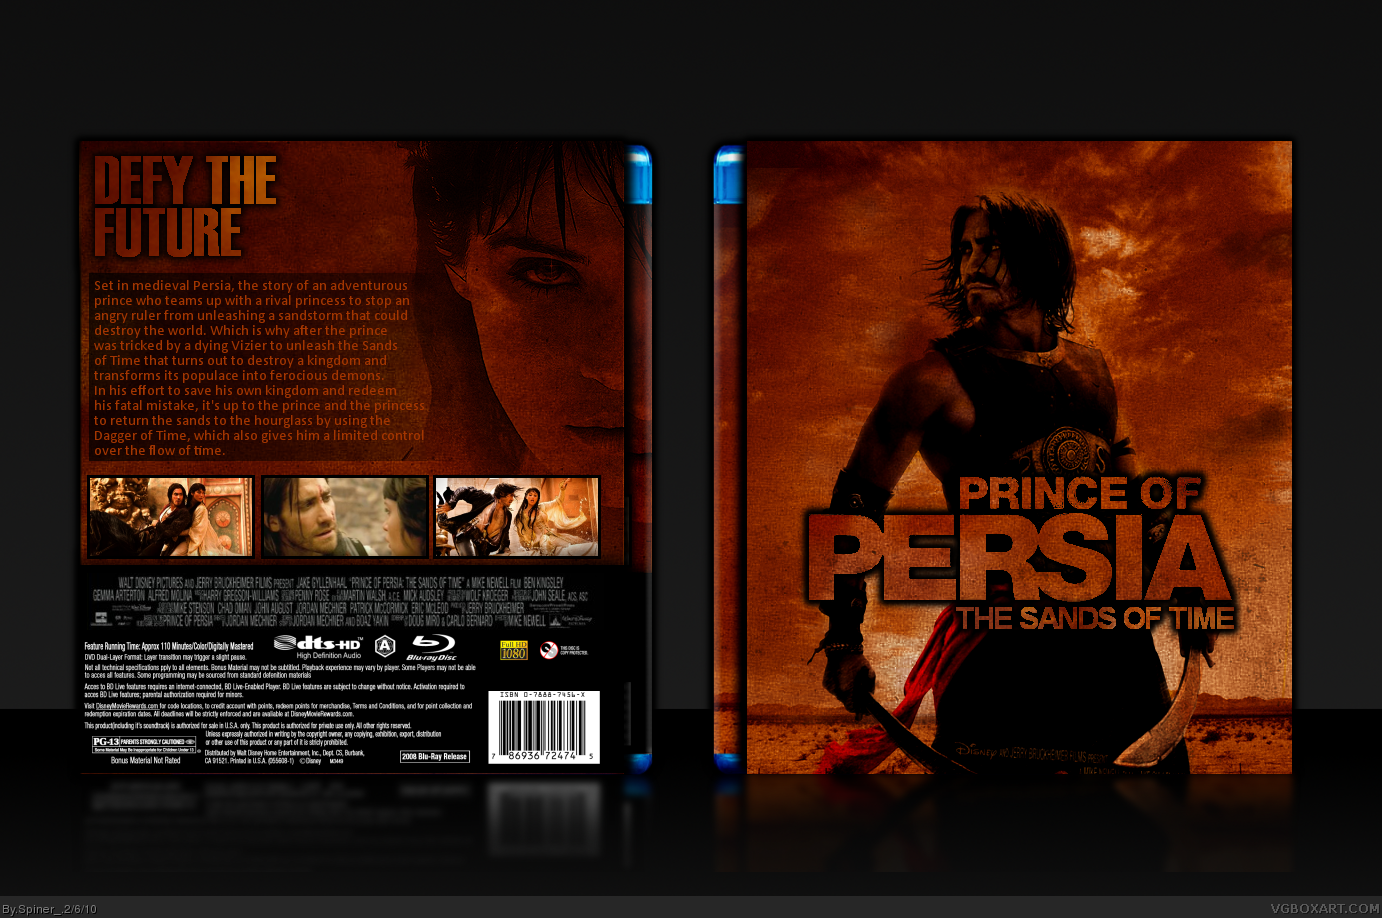 Prince of Persia: The Sands of Time box cover